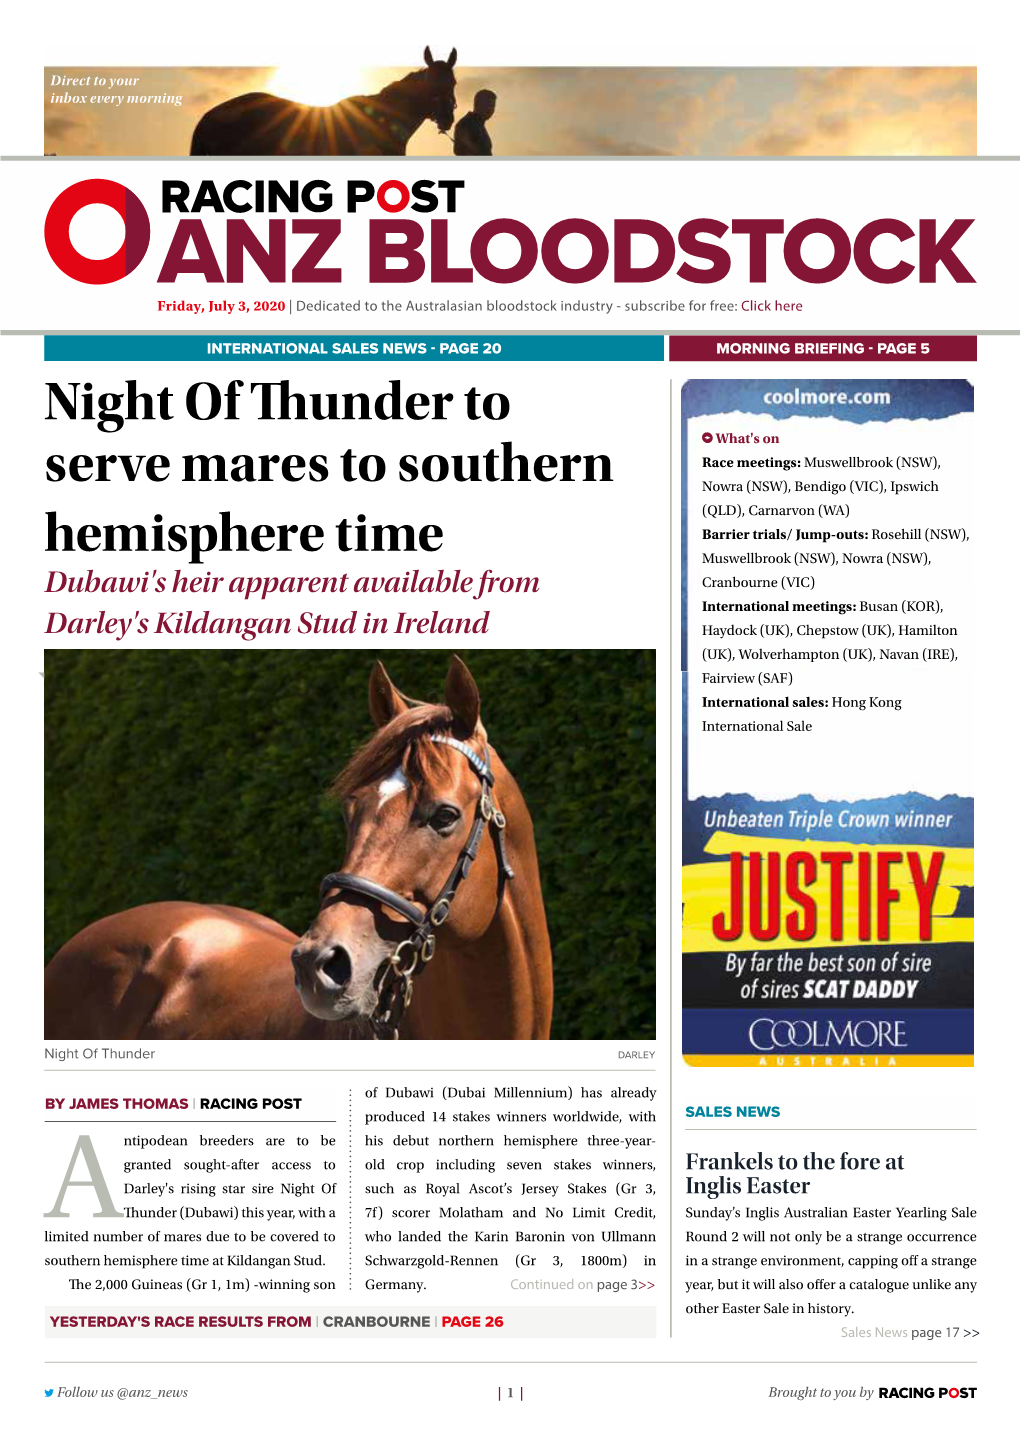 Night of Thunder to Serve Mares to Southern Hemisphere Time | 3 | Friday, July 3, 2020